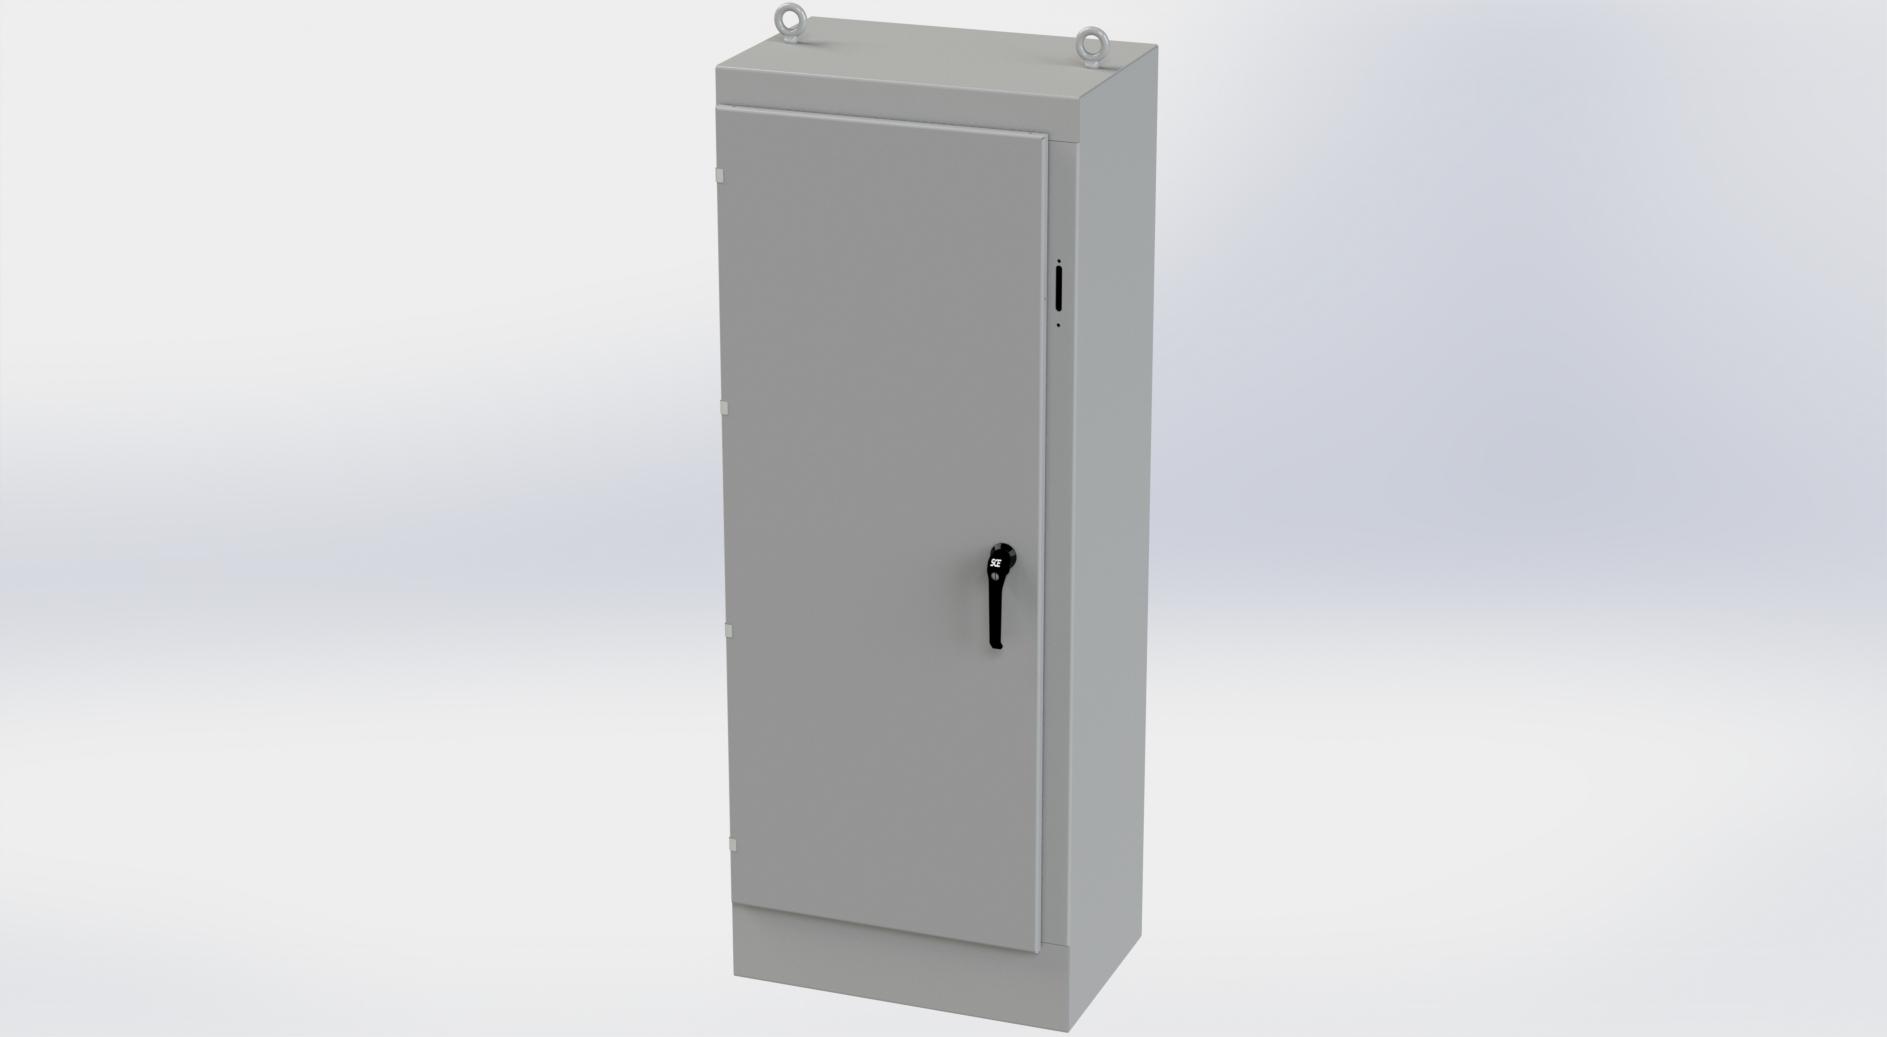 Saginaw Control SCE-72XM2818 1DR XM Enclosure, Height:72.00", Width:27.50", Depth:18.00", ANSI-61 gray powder coating inside and out. Sub-panels are powder coated white.  